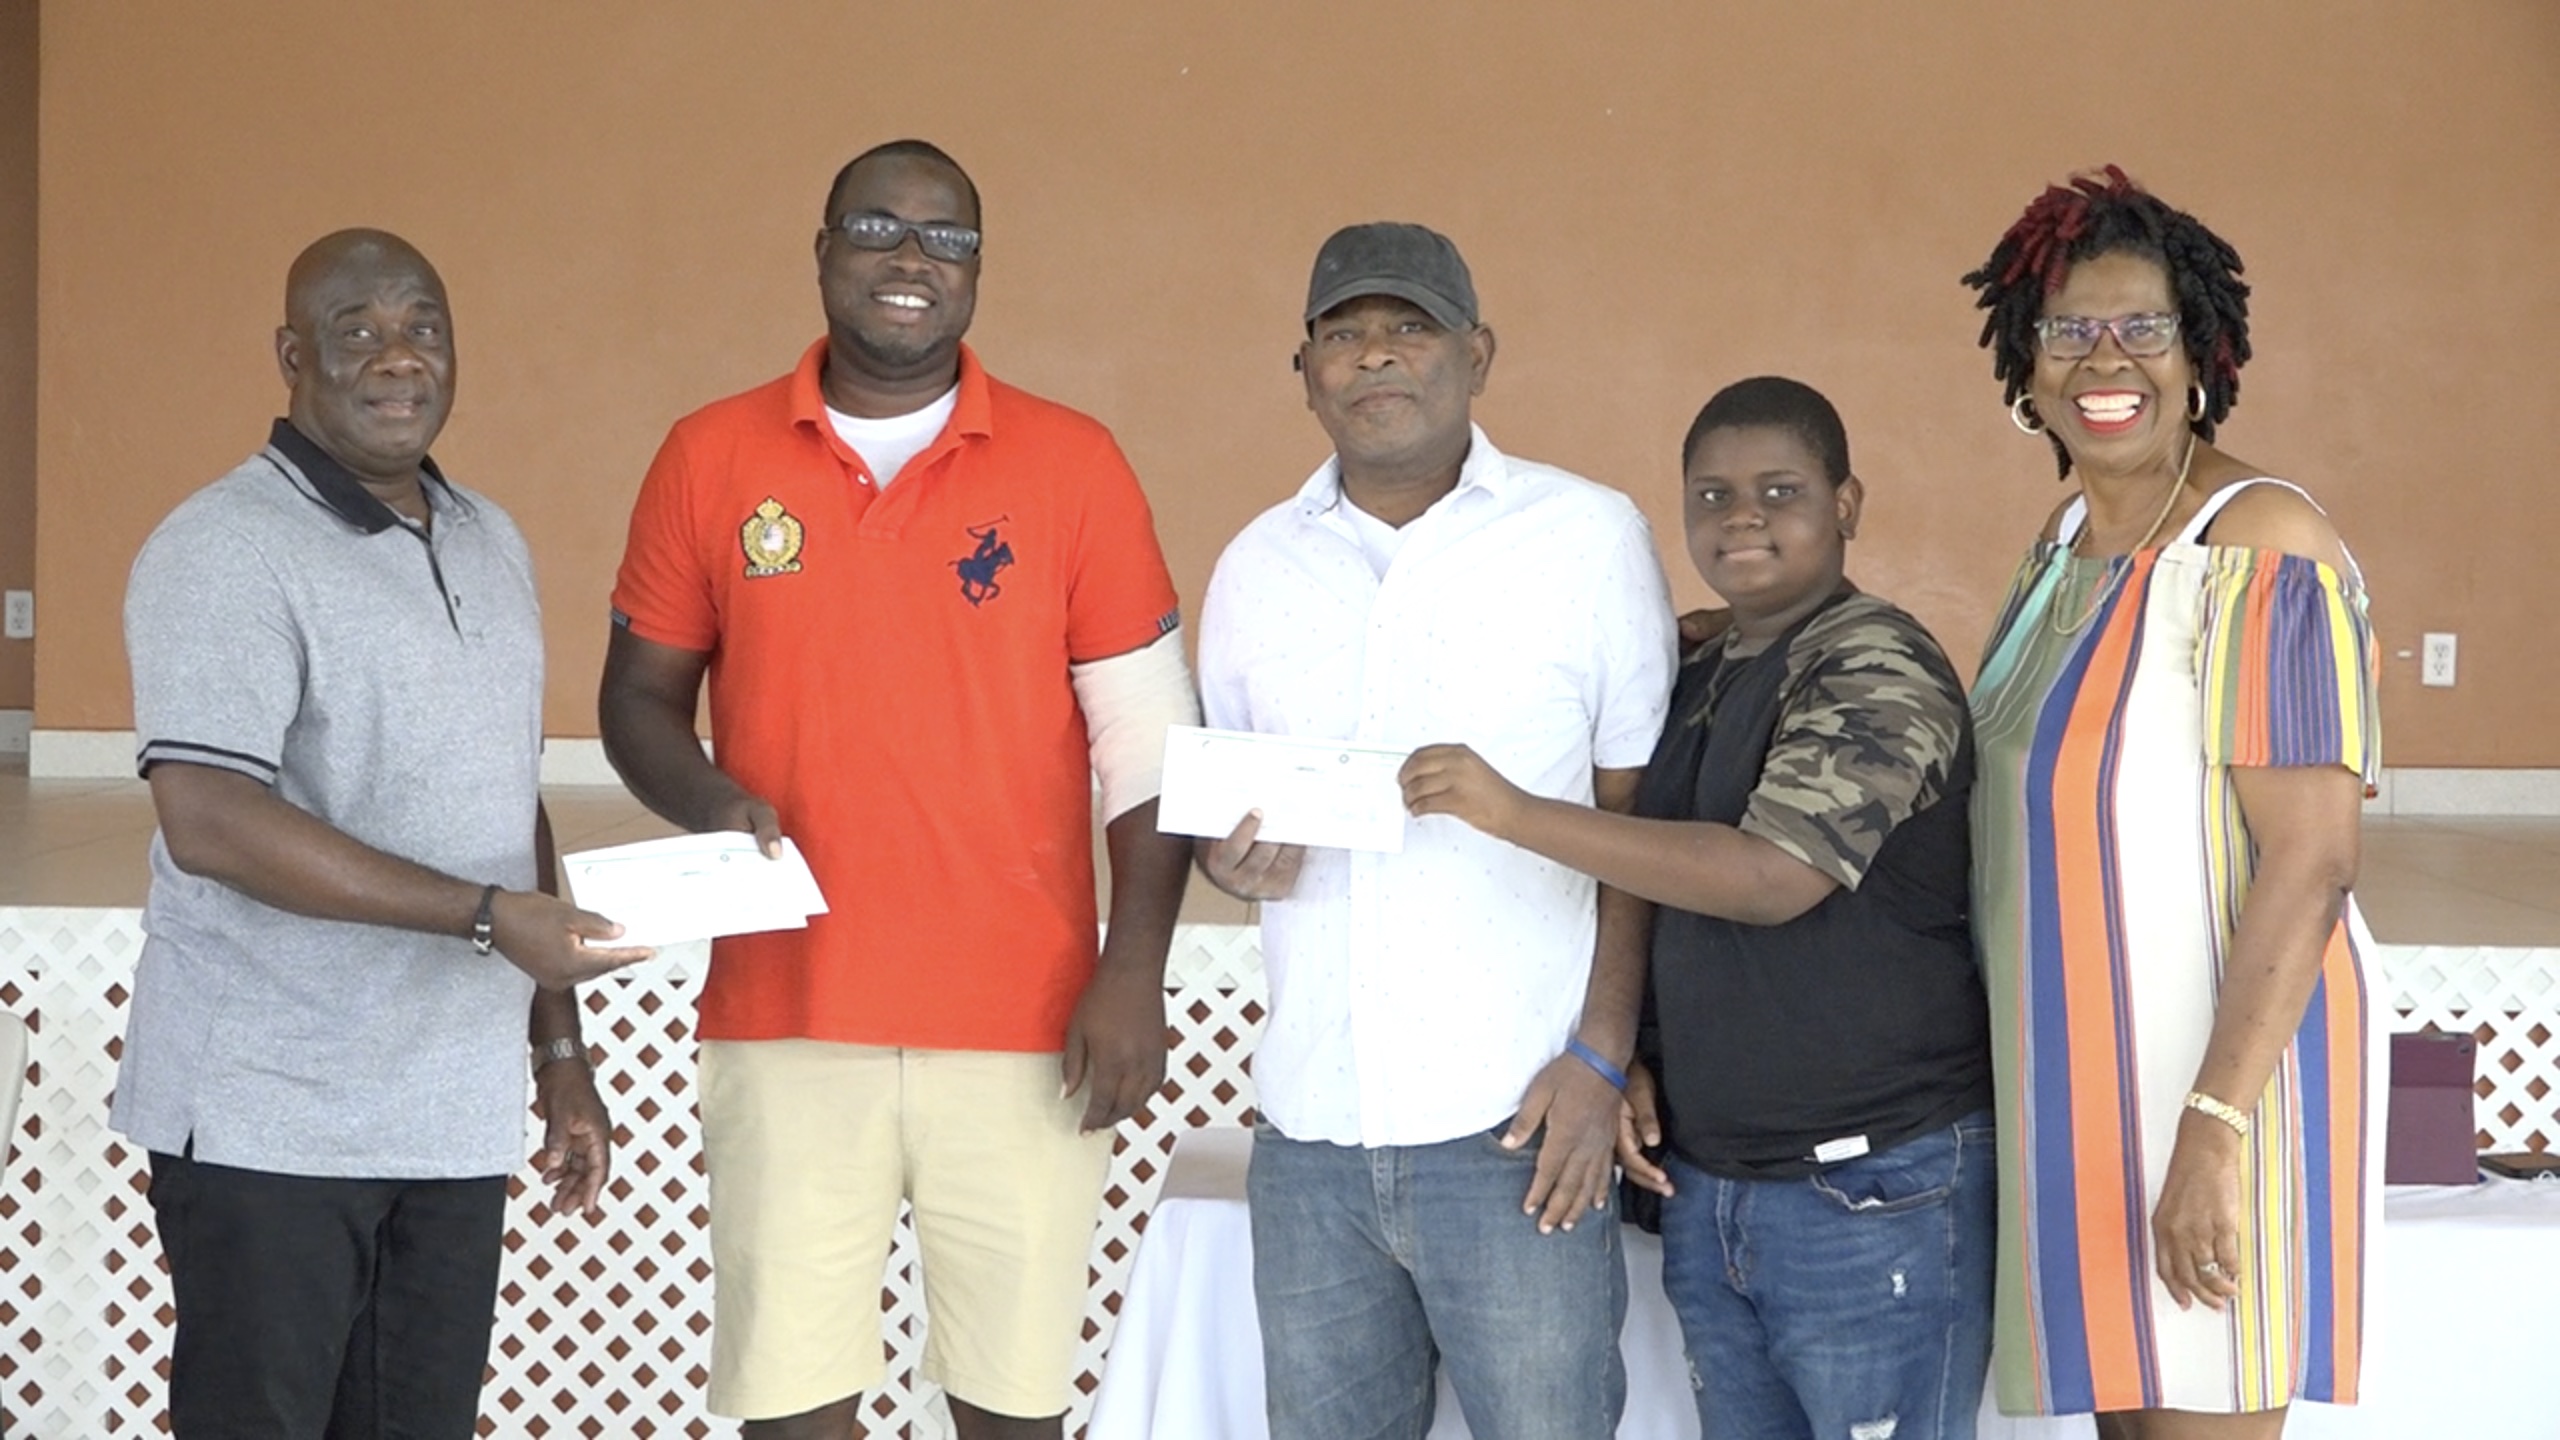 Dialysis patients from the St. James Parish Mr. Lester Pemberton (second from right) and Mr. Fitzroy Warner accompanied by his son (third from right) with Hon. Alexis Jeffers, Area Representative (extreme left); and Ms. Leonne Jeffers, representative of the Brick Kiln Community Group moments after they are presented with a cheque from members of the community to assist with medical expenses